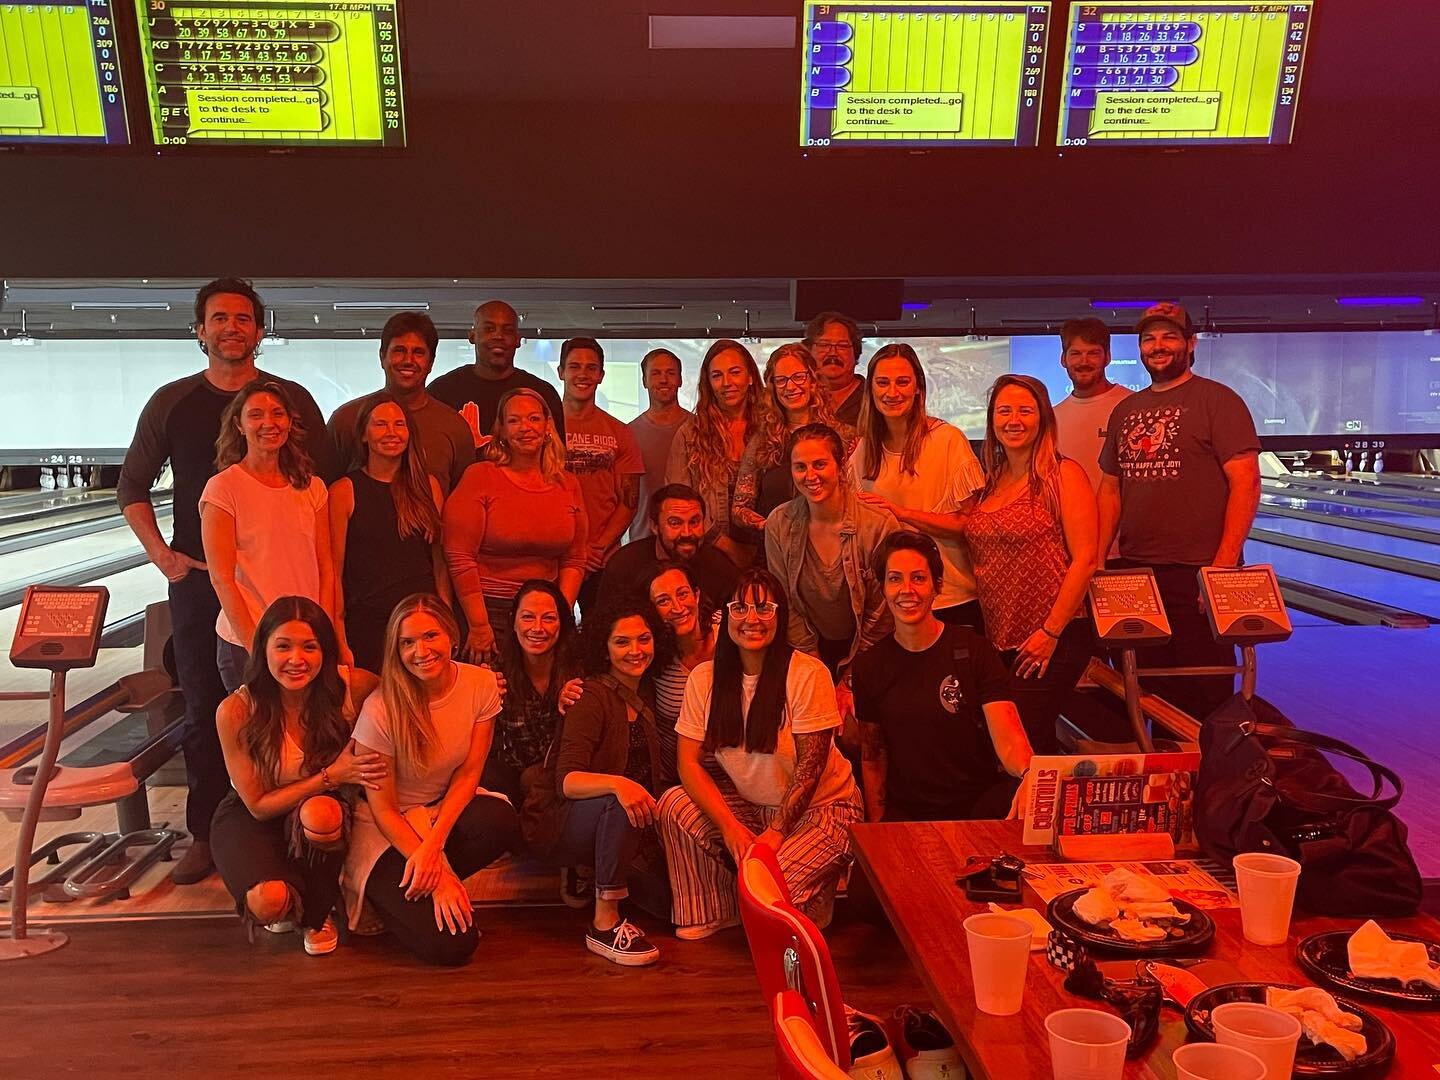 Another year and feeling extremely fortunate for our amazing team! What a fun night bowling!
 
We are missing a few but just means we will have to do it again!

#yogisbowling #strike #yogiperogi #getcorkedup #bowling